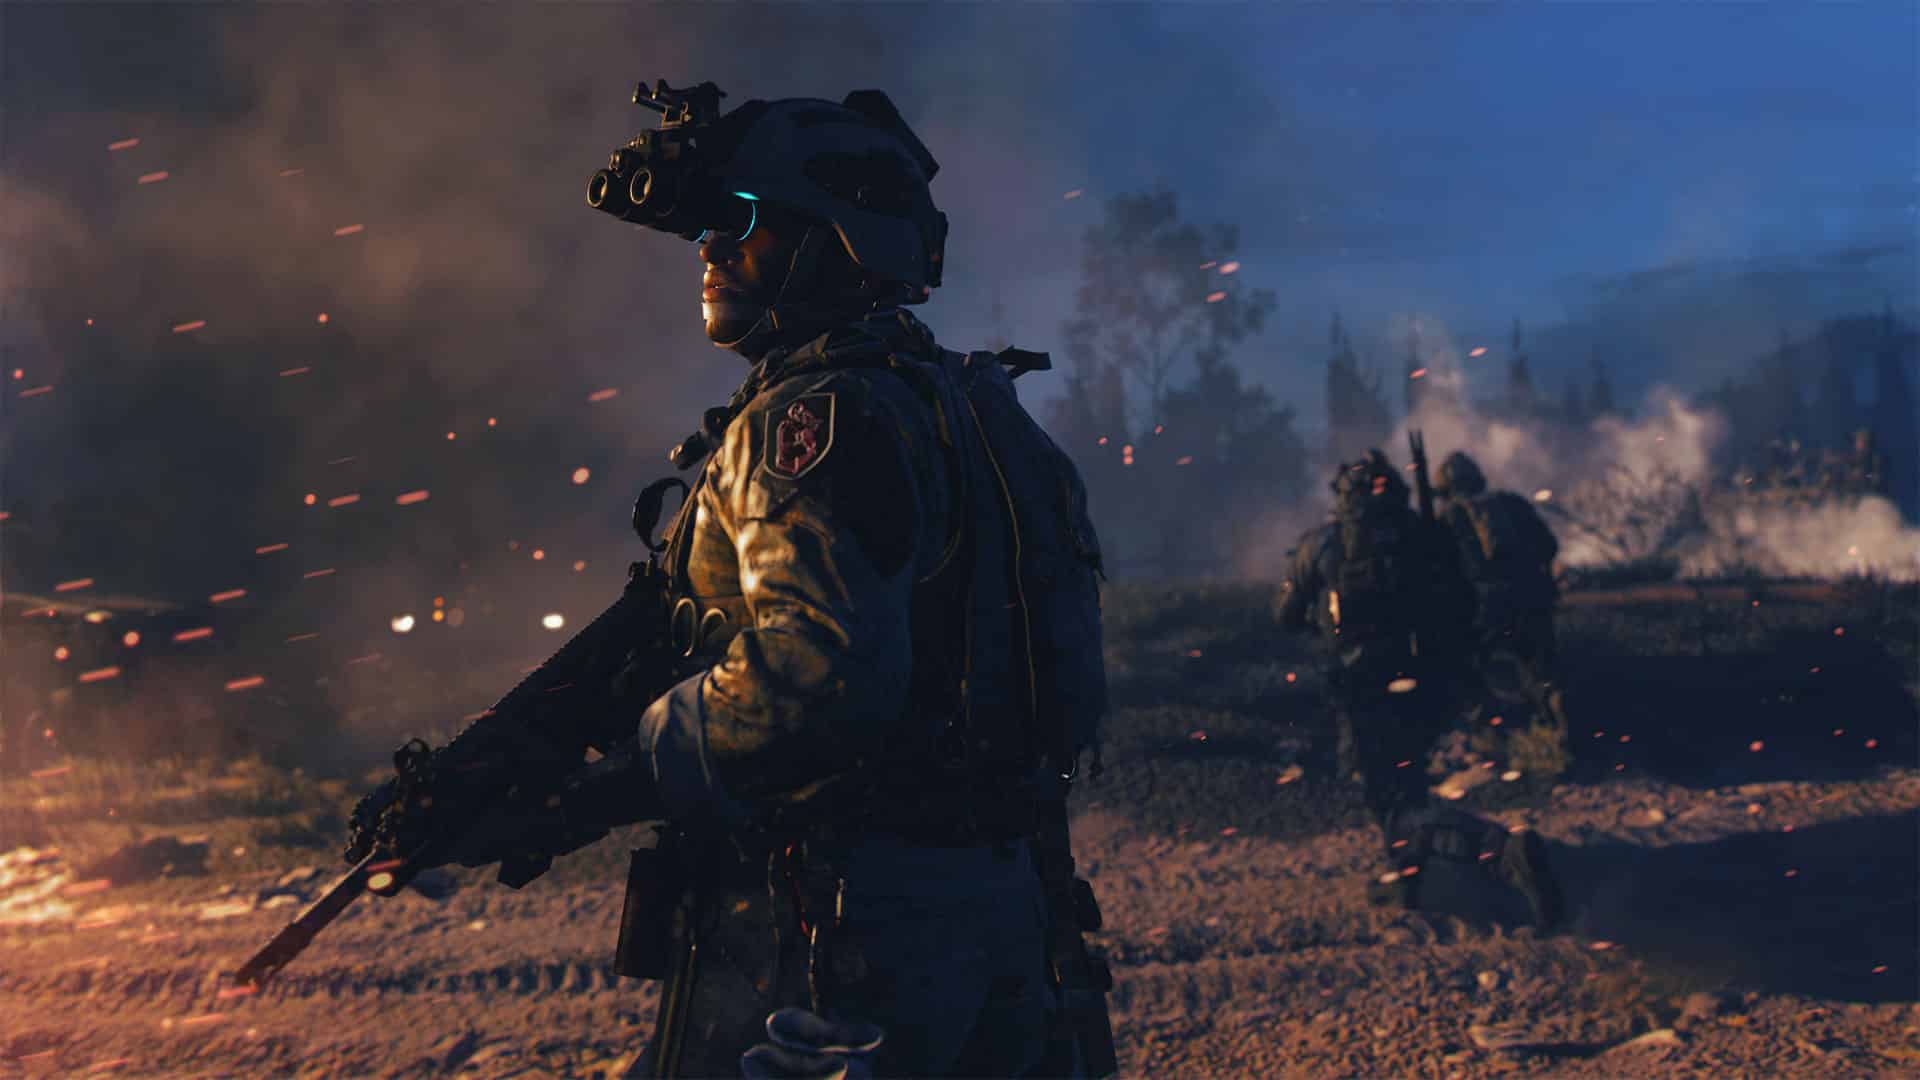 List of Major Video Games with an August - December 2022 Release Date - Call of Duty: Modern Warfare II